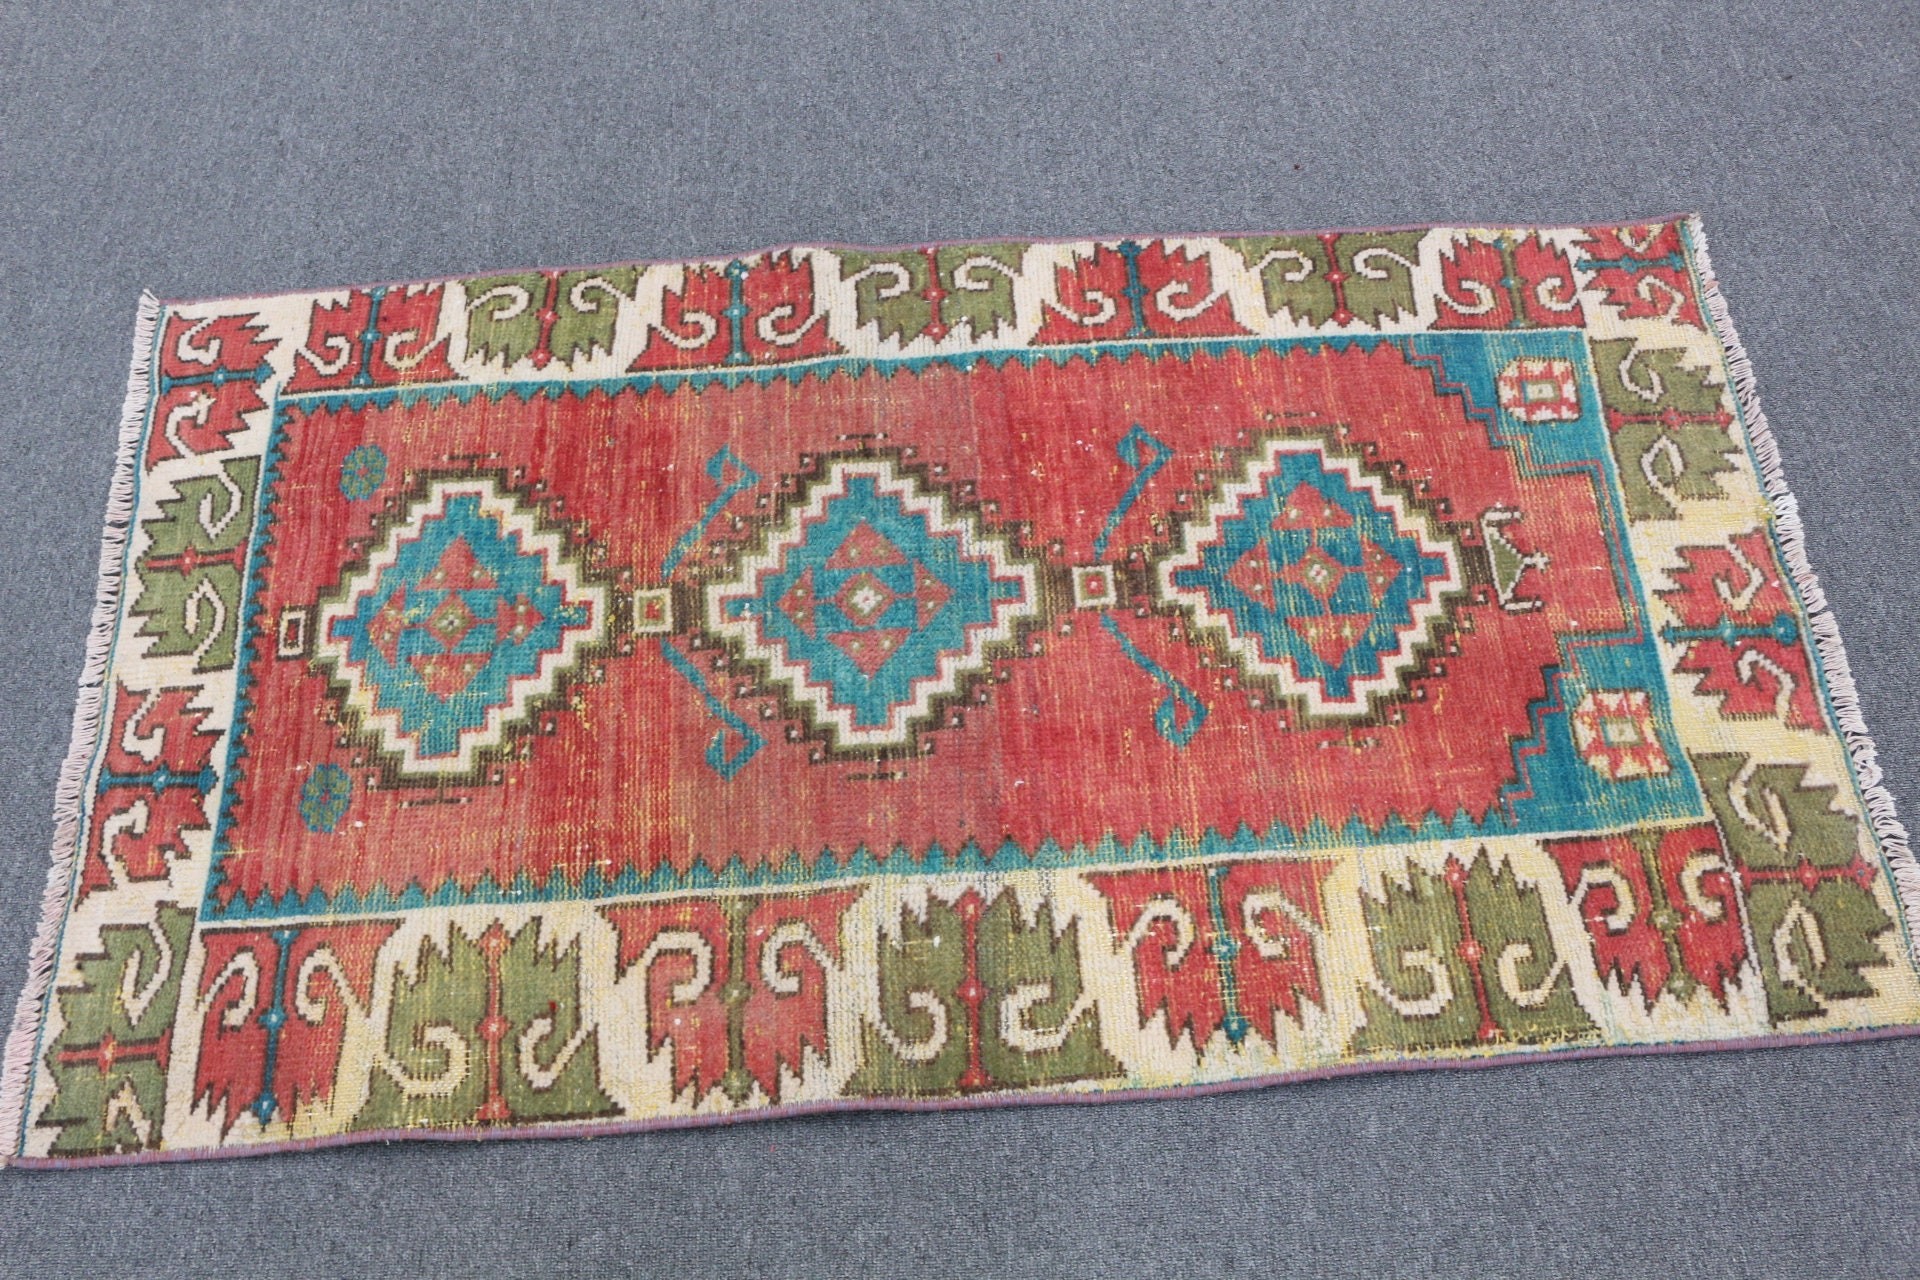 Oushak Rugs, Red Home Decor Rugs, 2.6x4.7 ft Small Rug, Turkish Rug, Vintage Rug, Moroccan Rug, Wall Hanging Rugs, Eclectic Rugs, Bath Rug